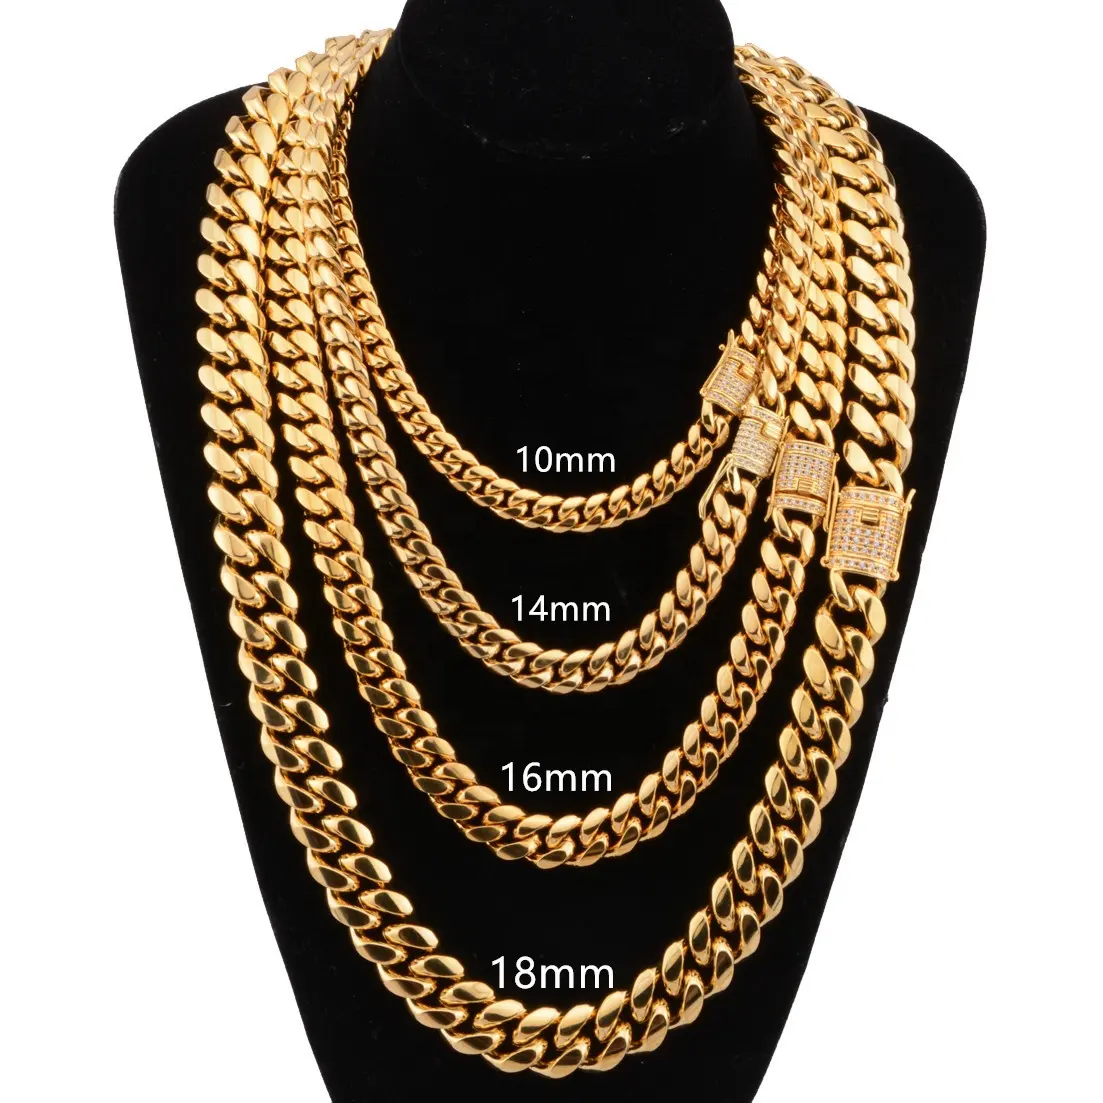 10 14 16 18mm Hotsale Hiphop Cuban Link Chain Choker Gold Plated Thick Chains Basic Punk Stainless Steel Necklace For Men Women